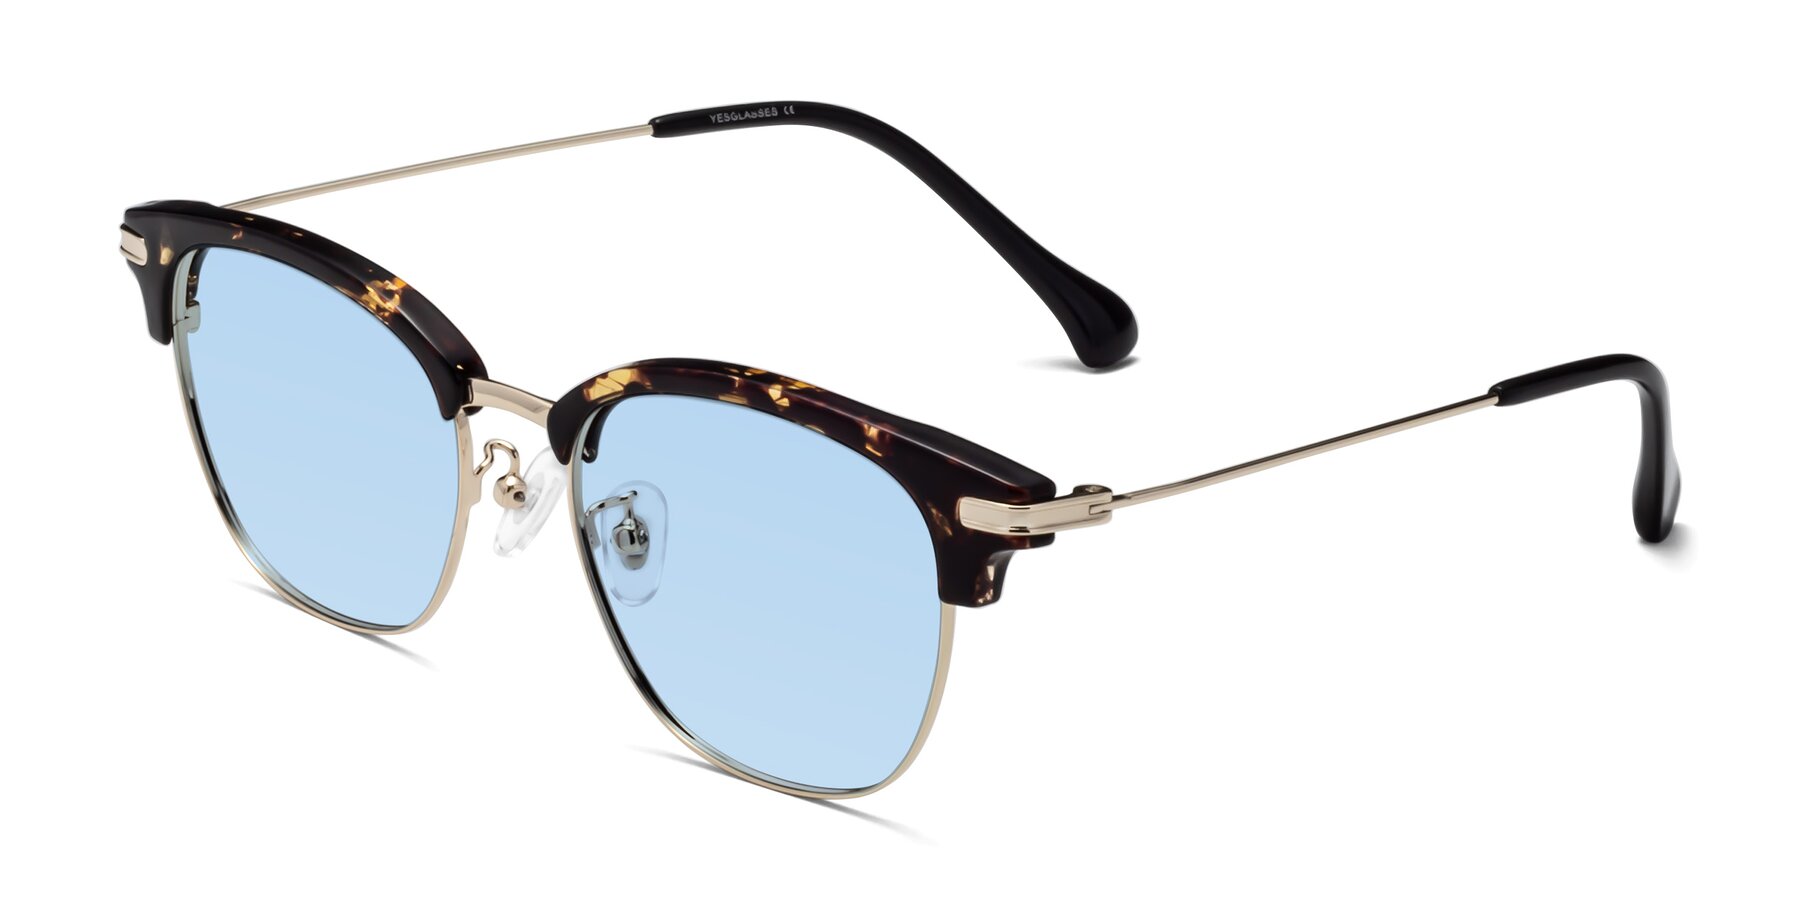 Angle of Obrien in Tortoise with Light Blue Tinted Lenses